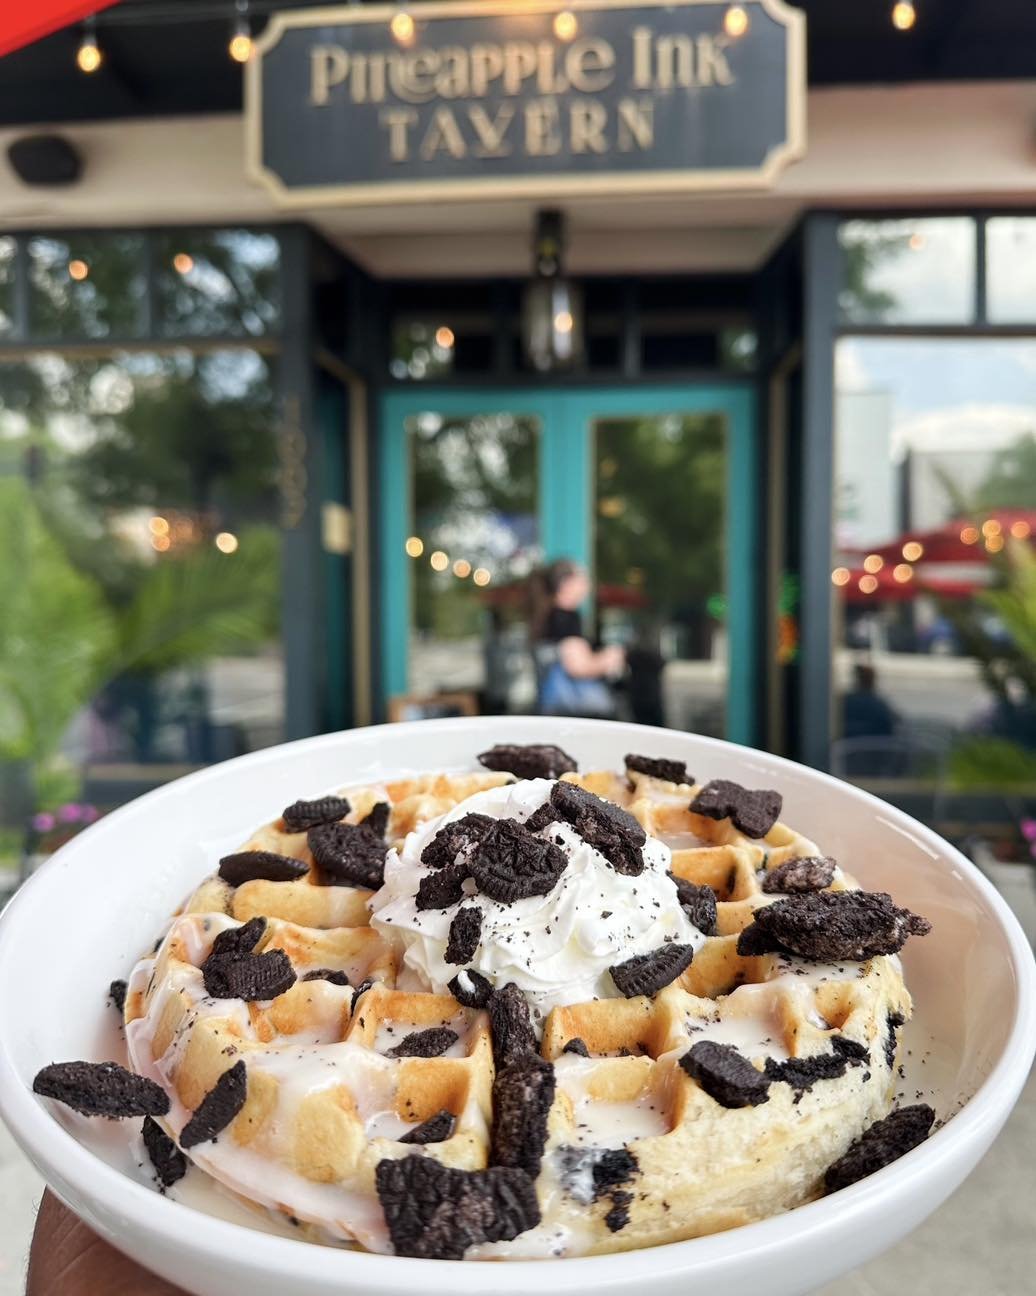 Indulge in brunch bliss with our special Cookies and Cream Waffle! Crispy, fluffy, and oh-so-delicious. Join us this weekend at Pineapple Ink Tavern! 🍪🥞🍫🥛 

#BrunchDelights #WeekendTreats #CookiesAndCreamWaffle